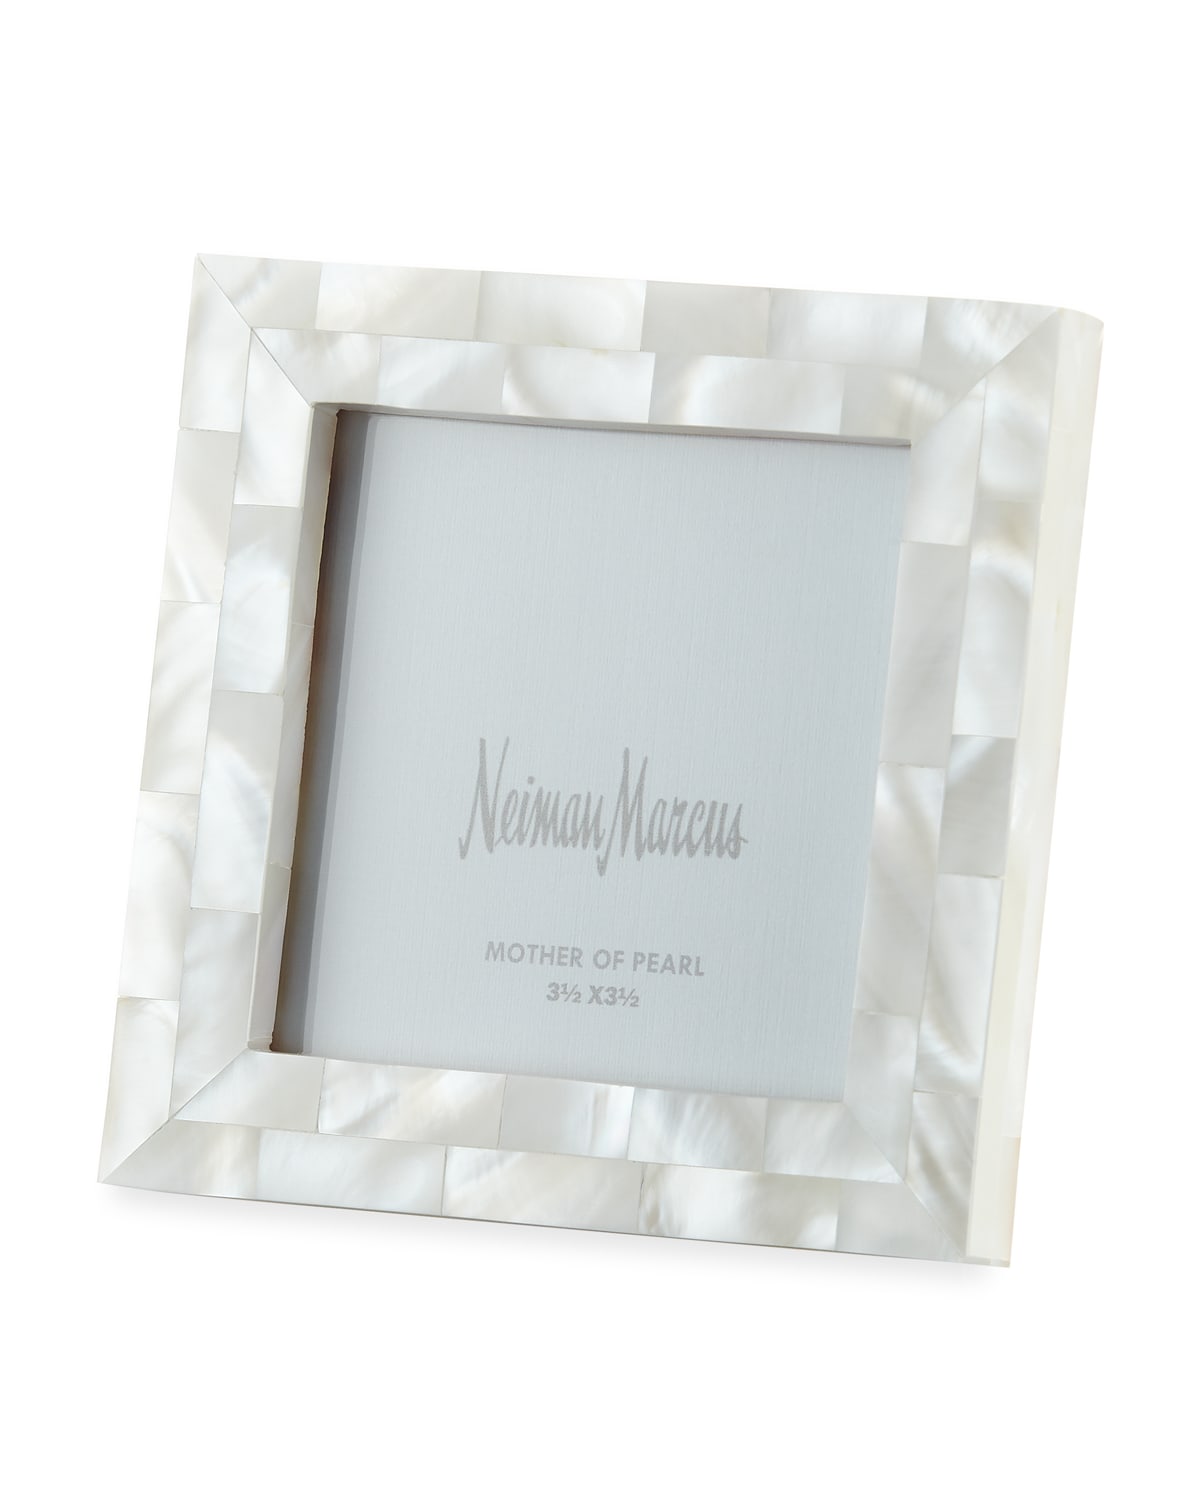 Shop The Jws Collections Mother-of-pearl Picture Frame, White, 3.5" X 3.5"